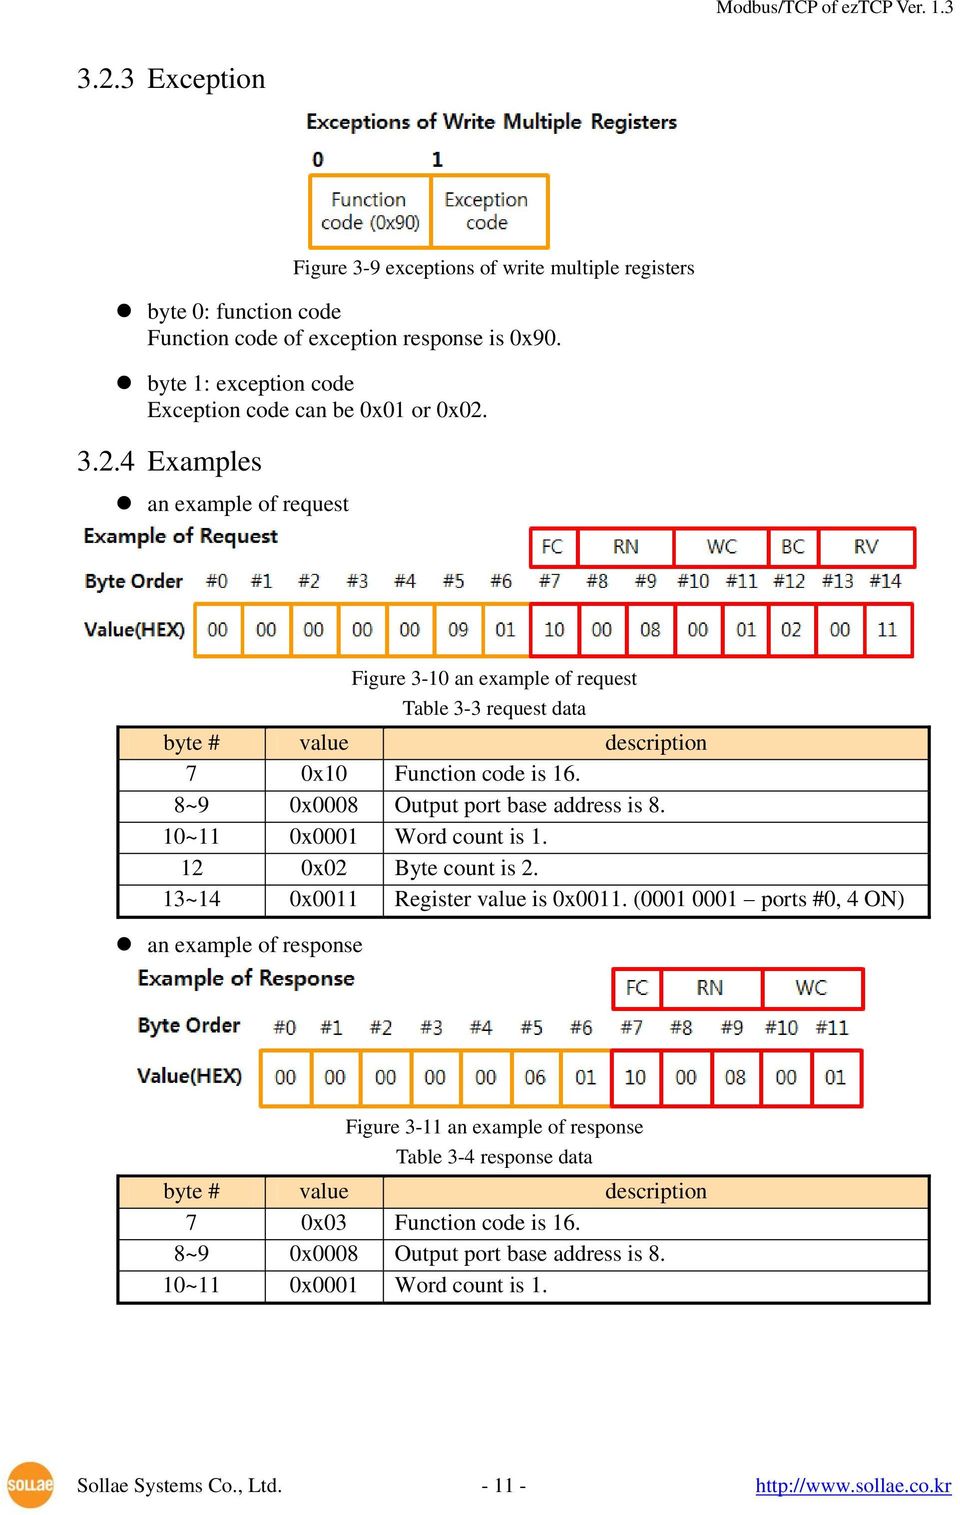 (0001 0001 ports #0, 4 ON) an example of response Figure 3-11 an example of response Table 3-4 response data byte # value description 7 0x03 Function code is 16.